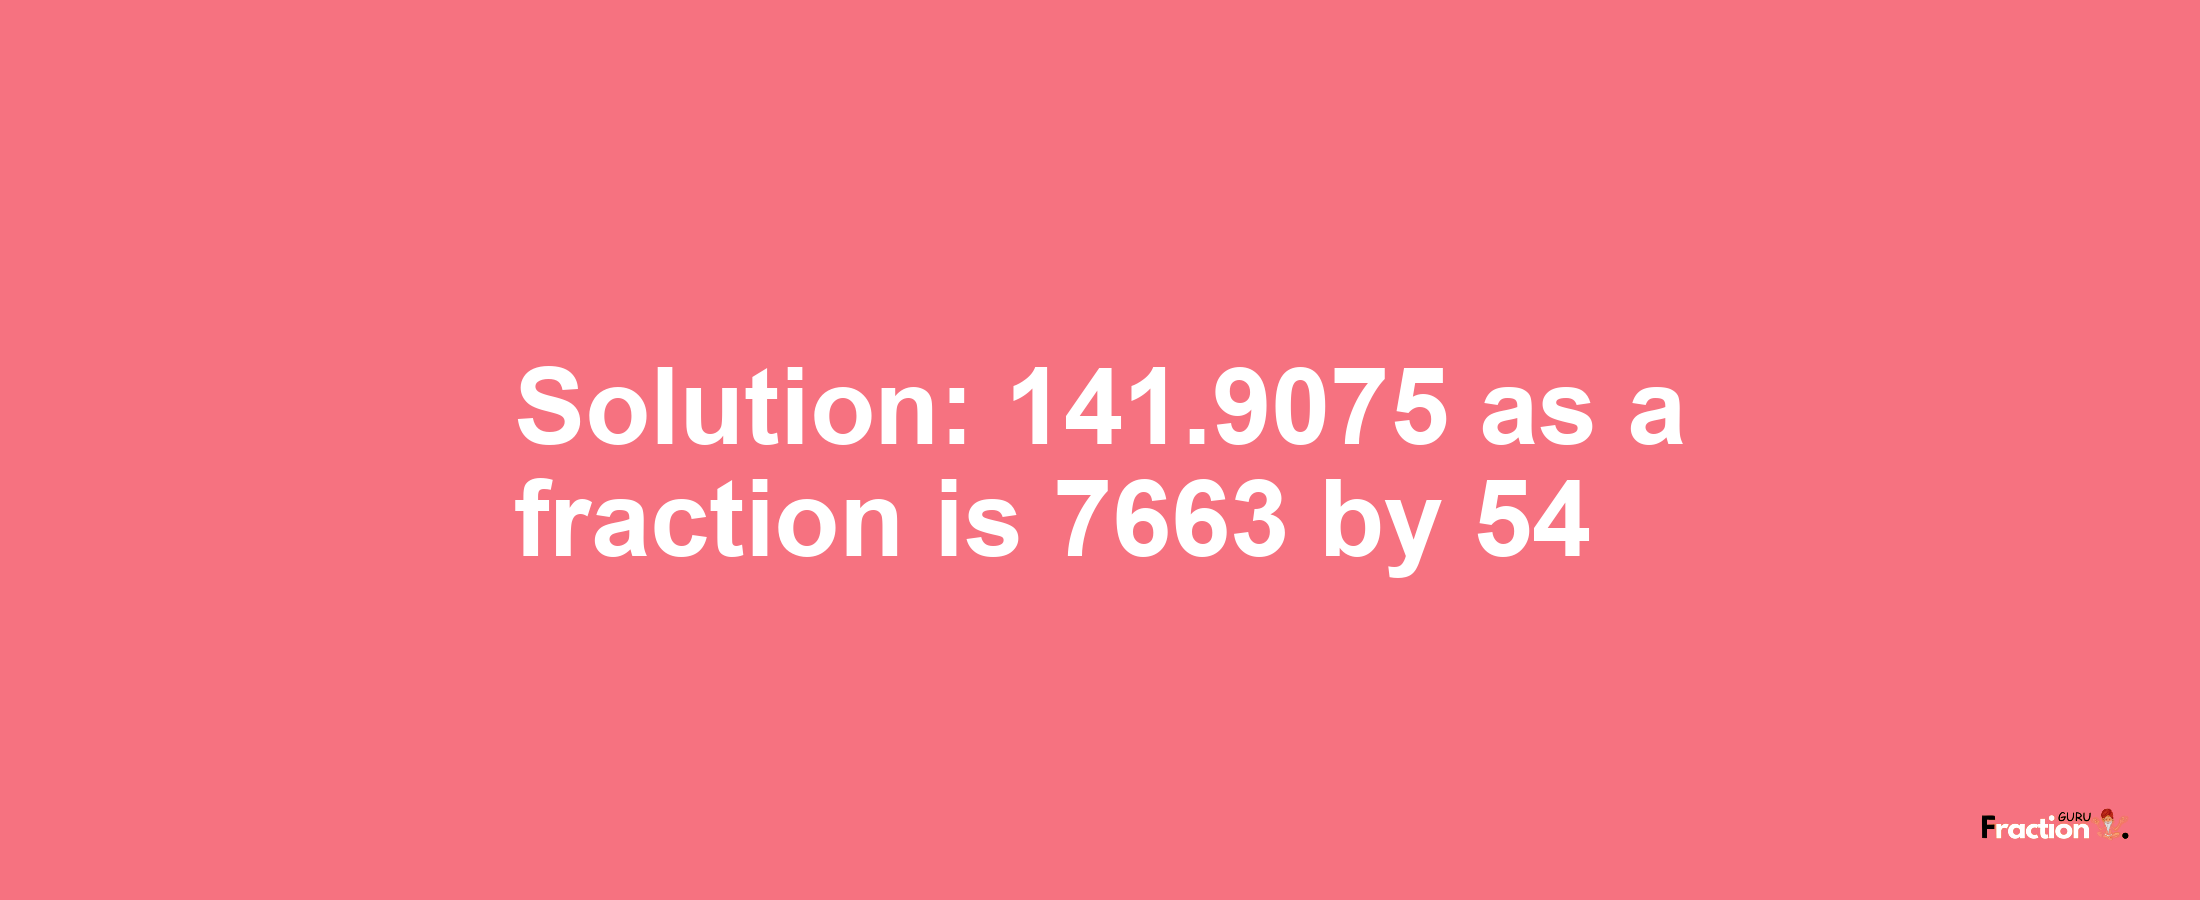 Solution:141.9075 as a fraction is 7663/54